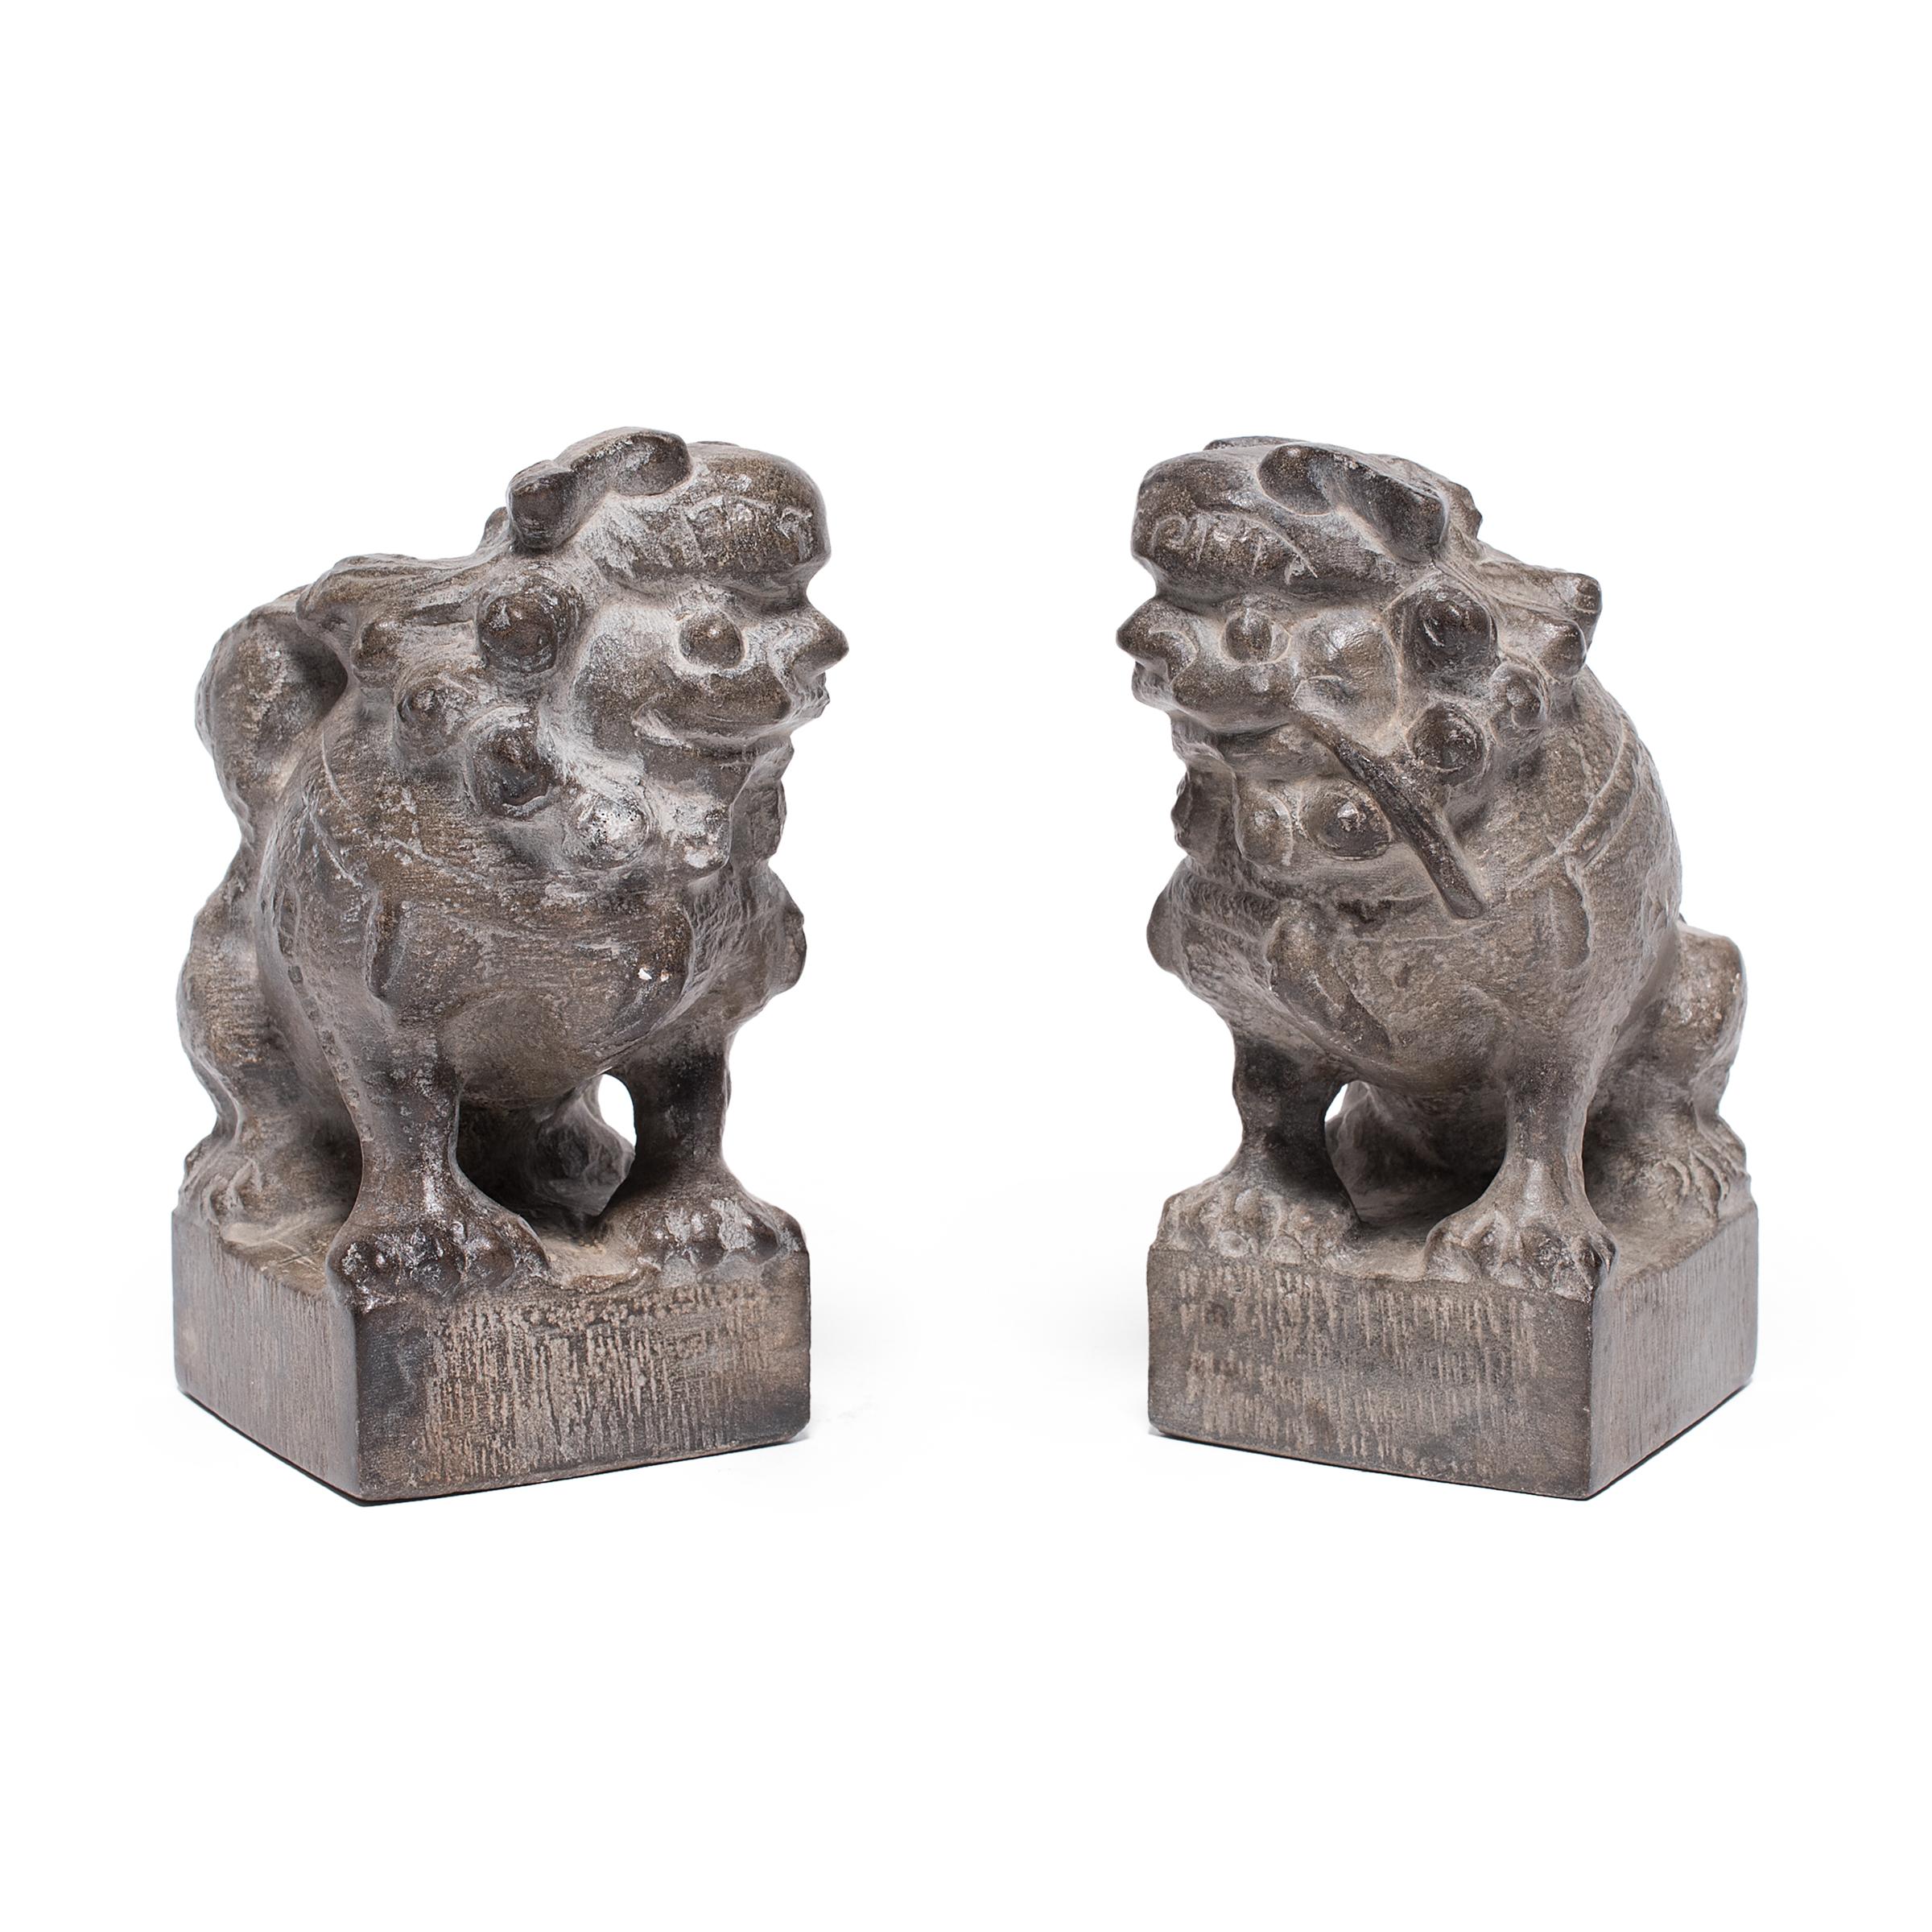 With curly manes and playful expressions, these petite stone fu dogs are adorable companions and benevolent guardians of the home. Also known as shizi, the pair represents yin and yang, the dual forces of the universe. Seated in mirrored postures,